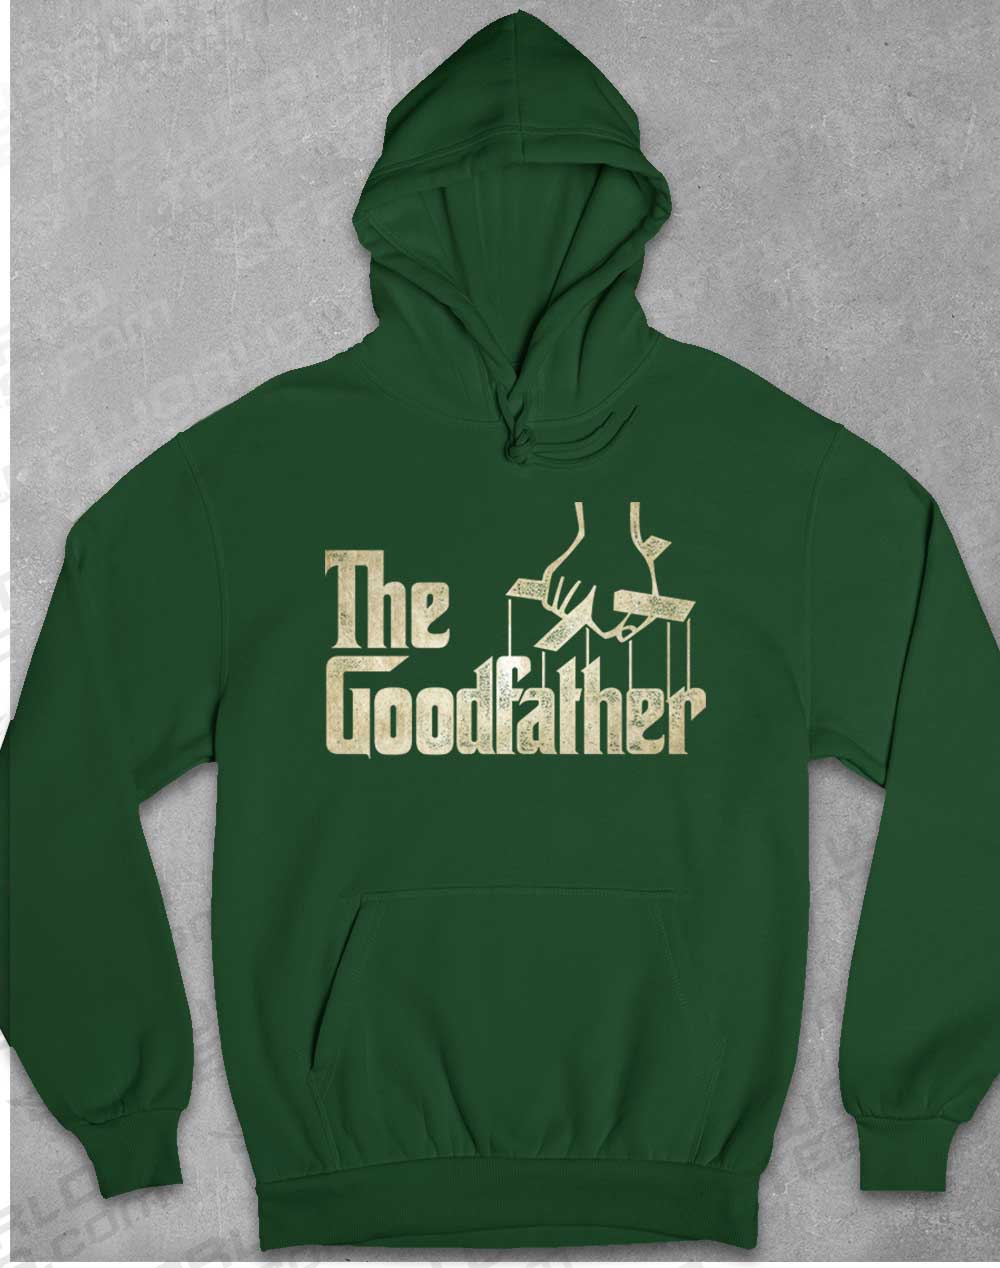 Bottle Green - The Goodfather Hoodie